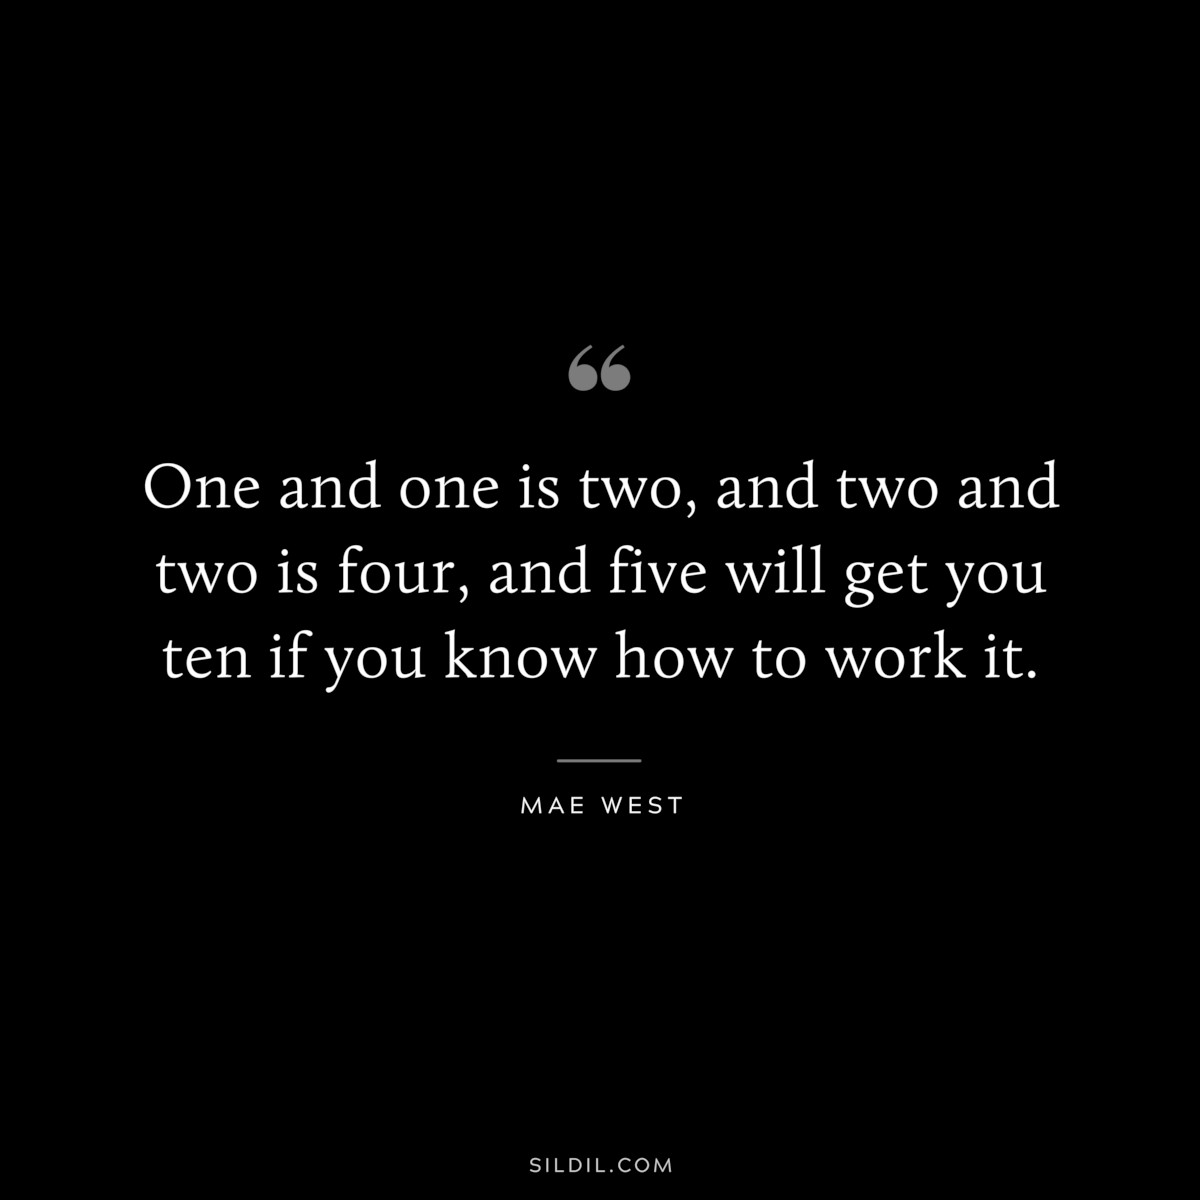 One and one is two, and two and two is four, and five will get you ten if you know how to work it. ― Mae West